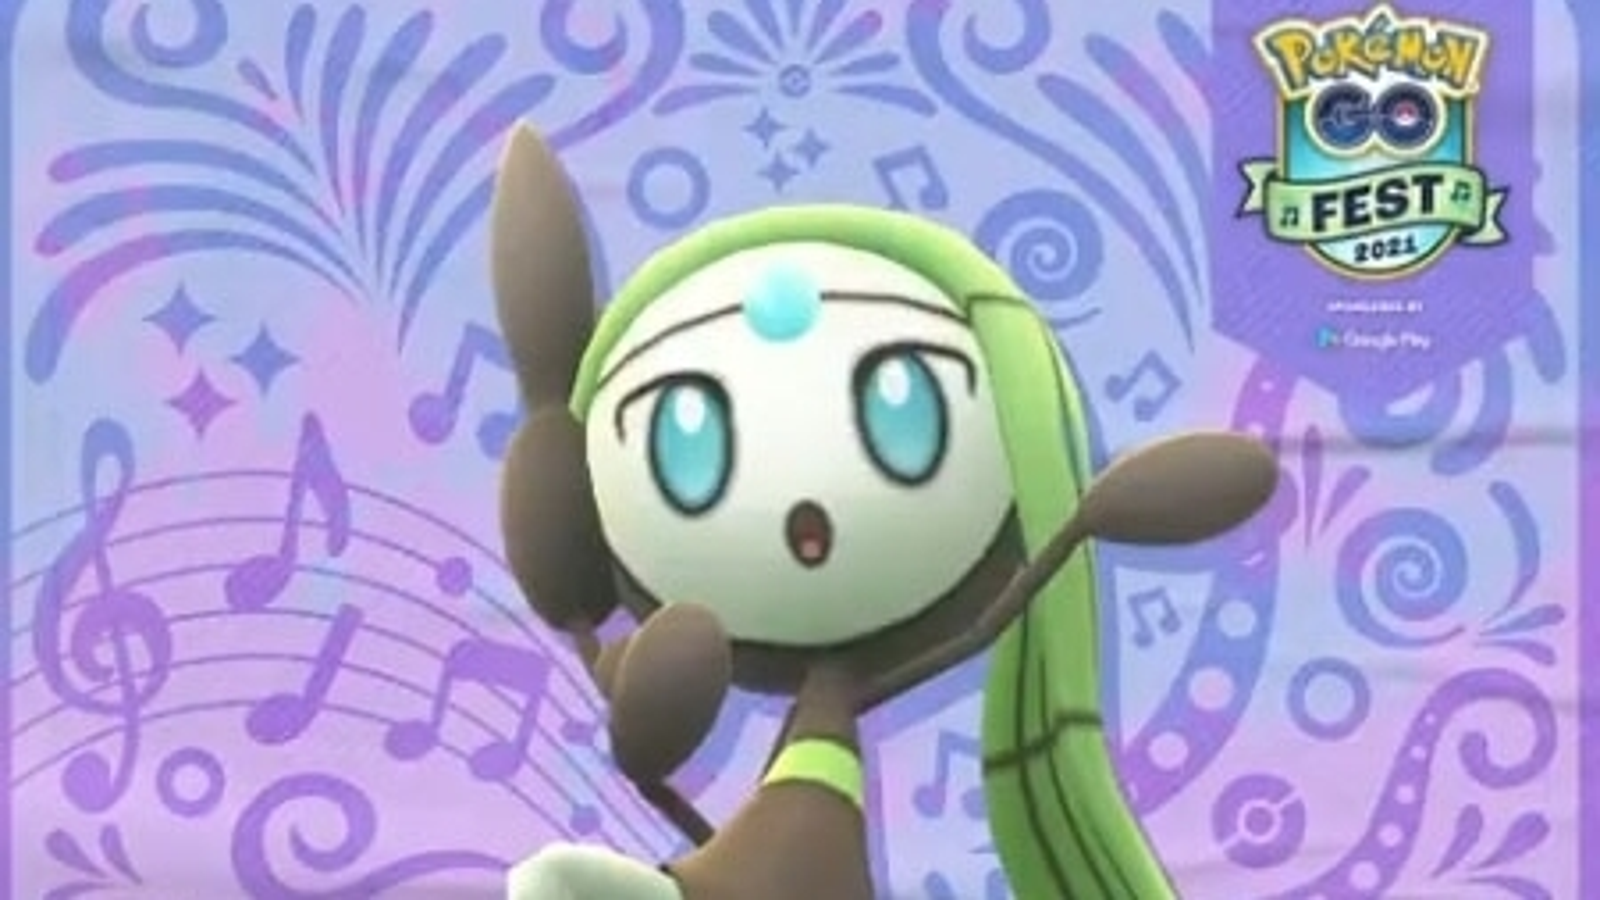 Relic Song, A Signature Meloetta Move, May Have Leaked in Pokemon GO